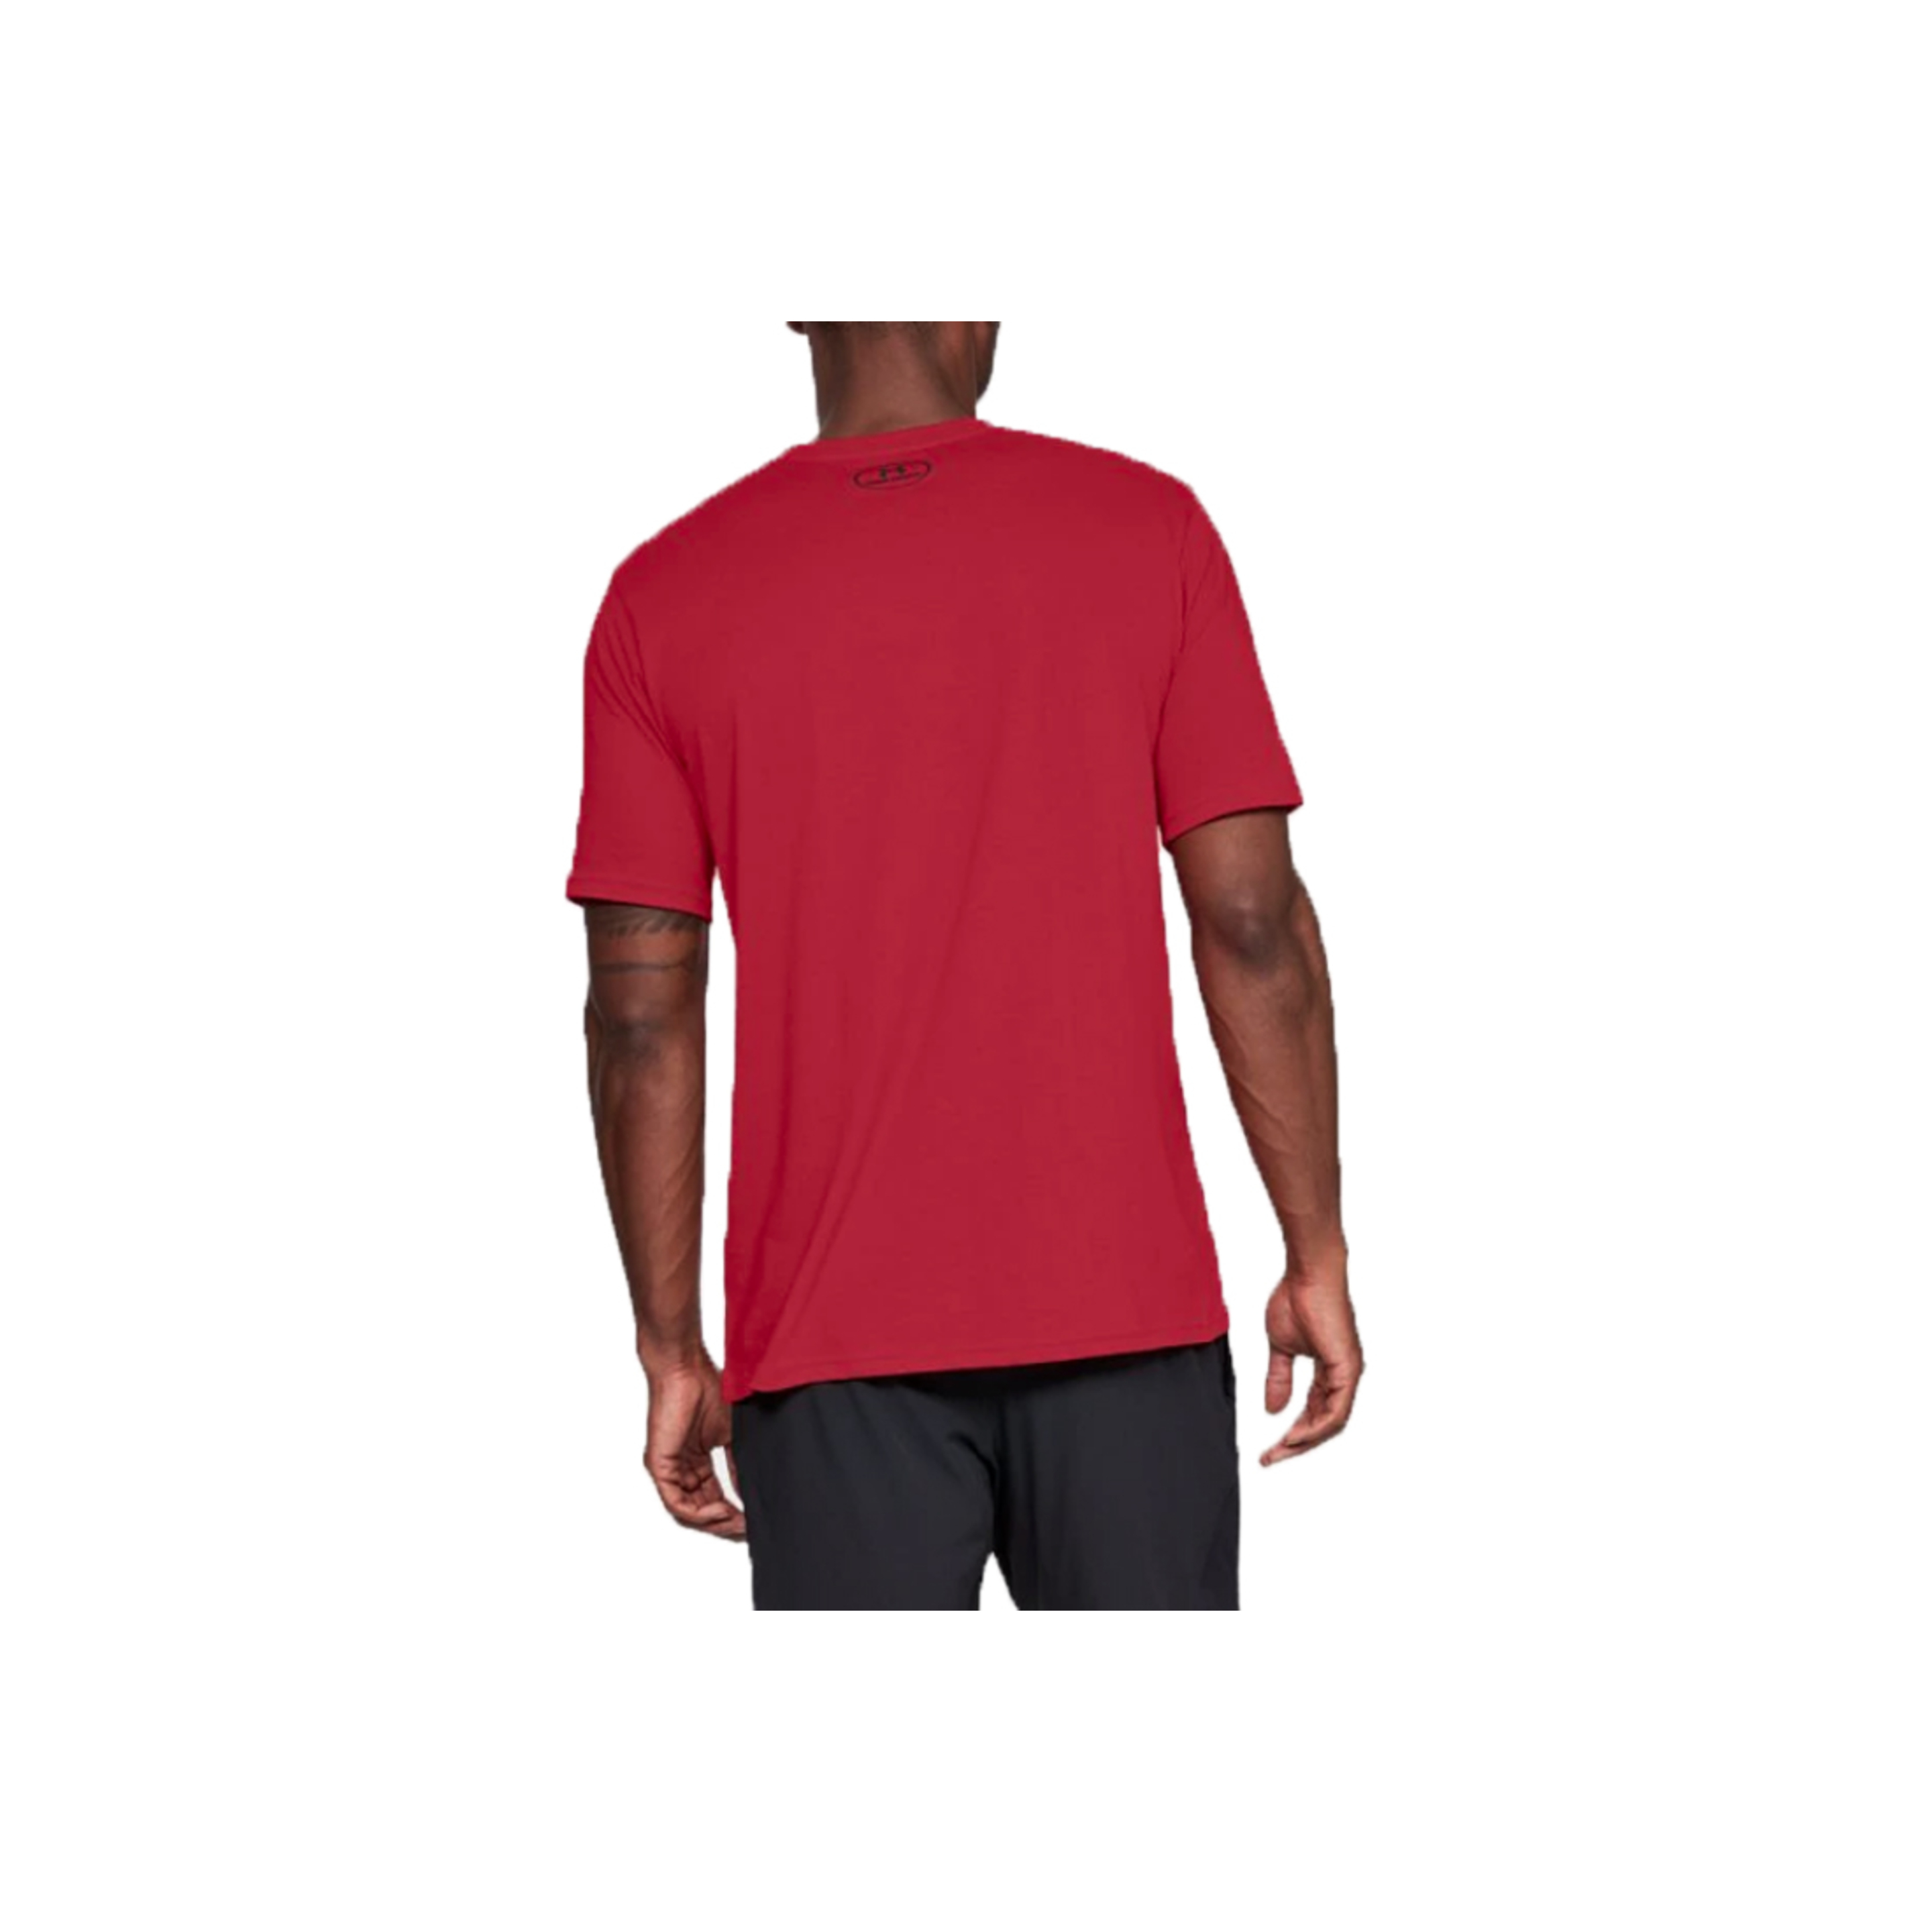 Under Armour Sportstyle Left Chest Tee 1326799-600